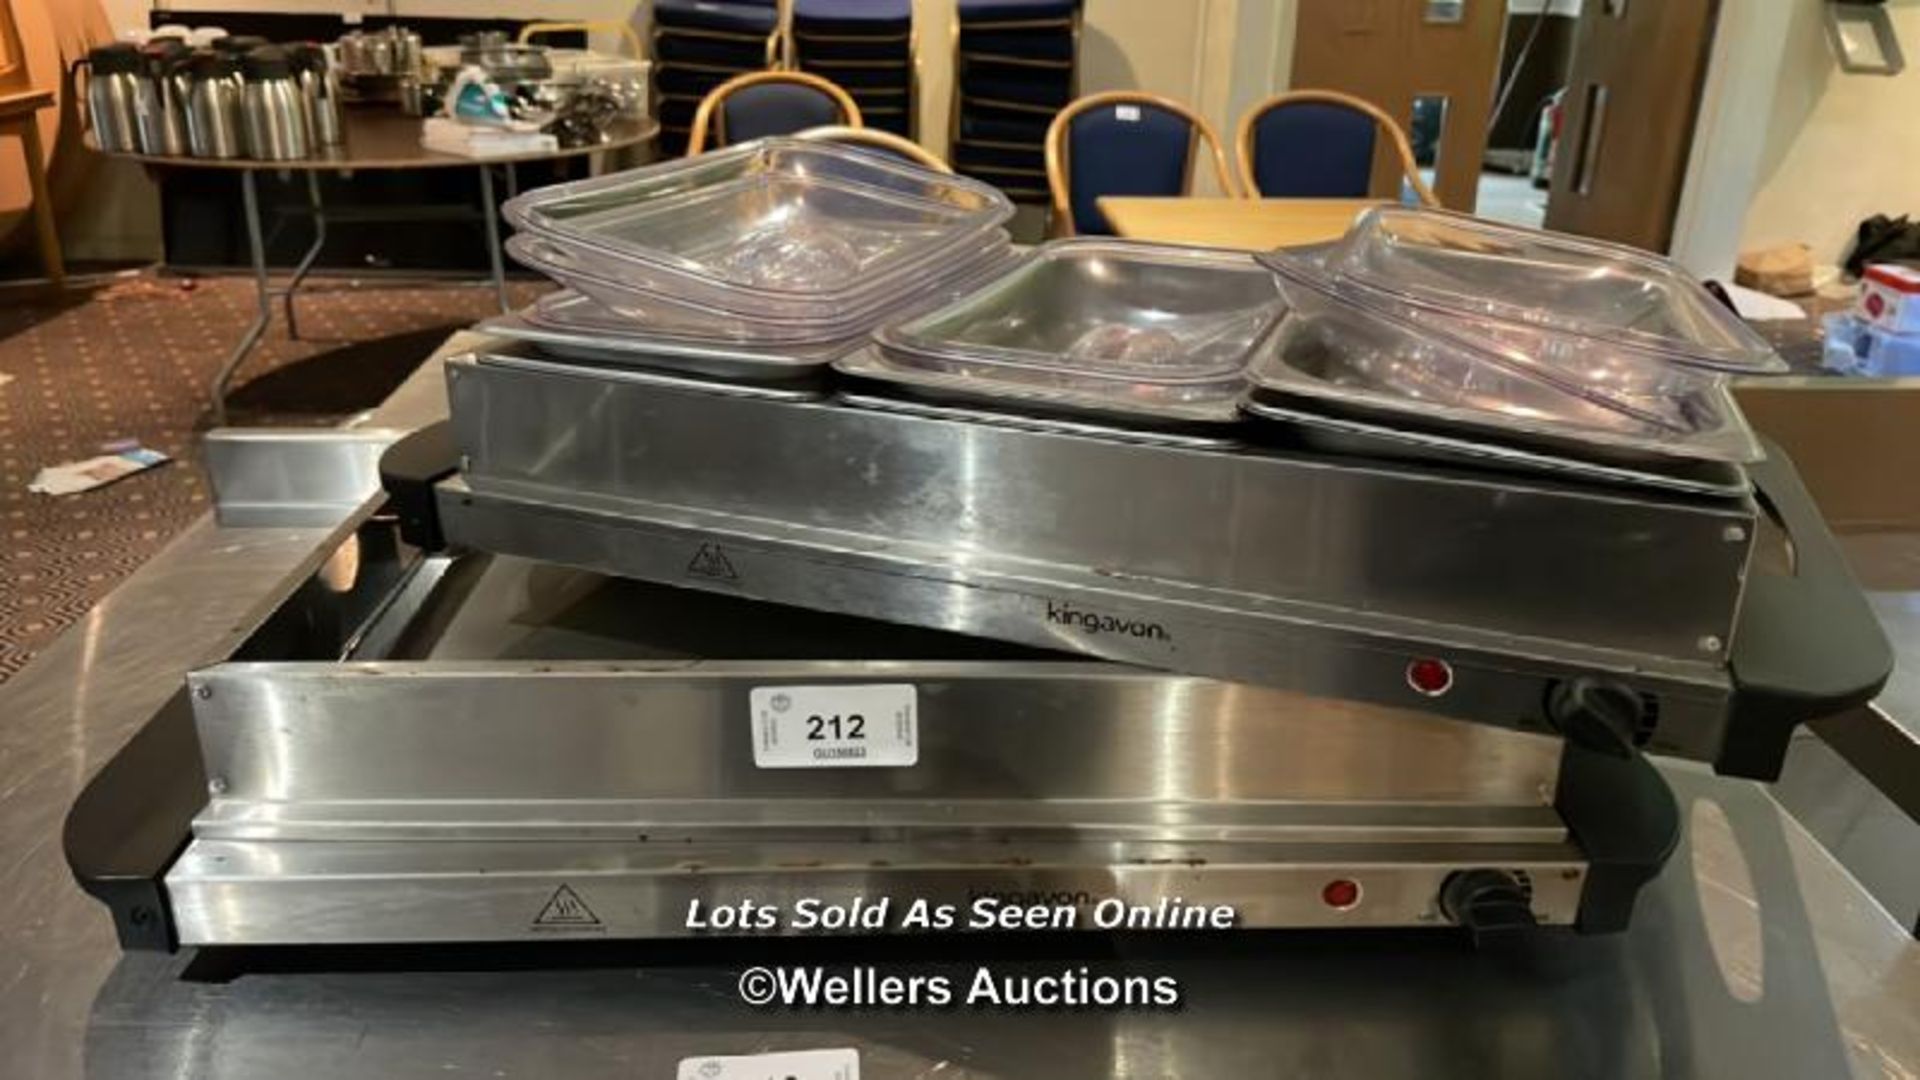 2X KINGAVON BS100 THREE BAY BUFFET SERVERS, WITH 6X TRAYS AND LIDS / COLLECTION LOCATION: OLD WOKING